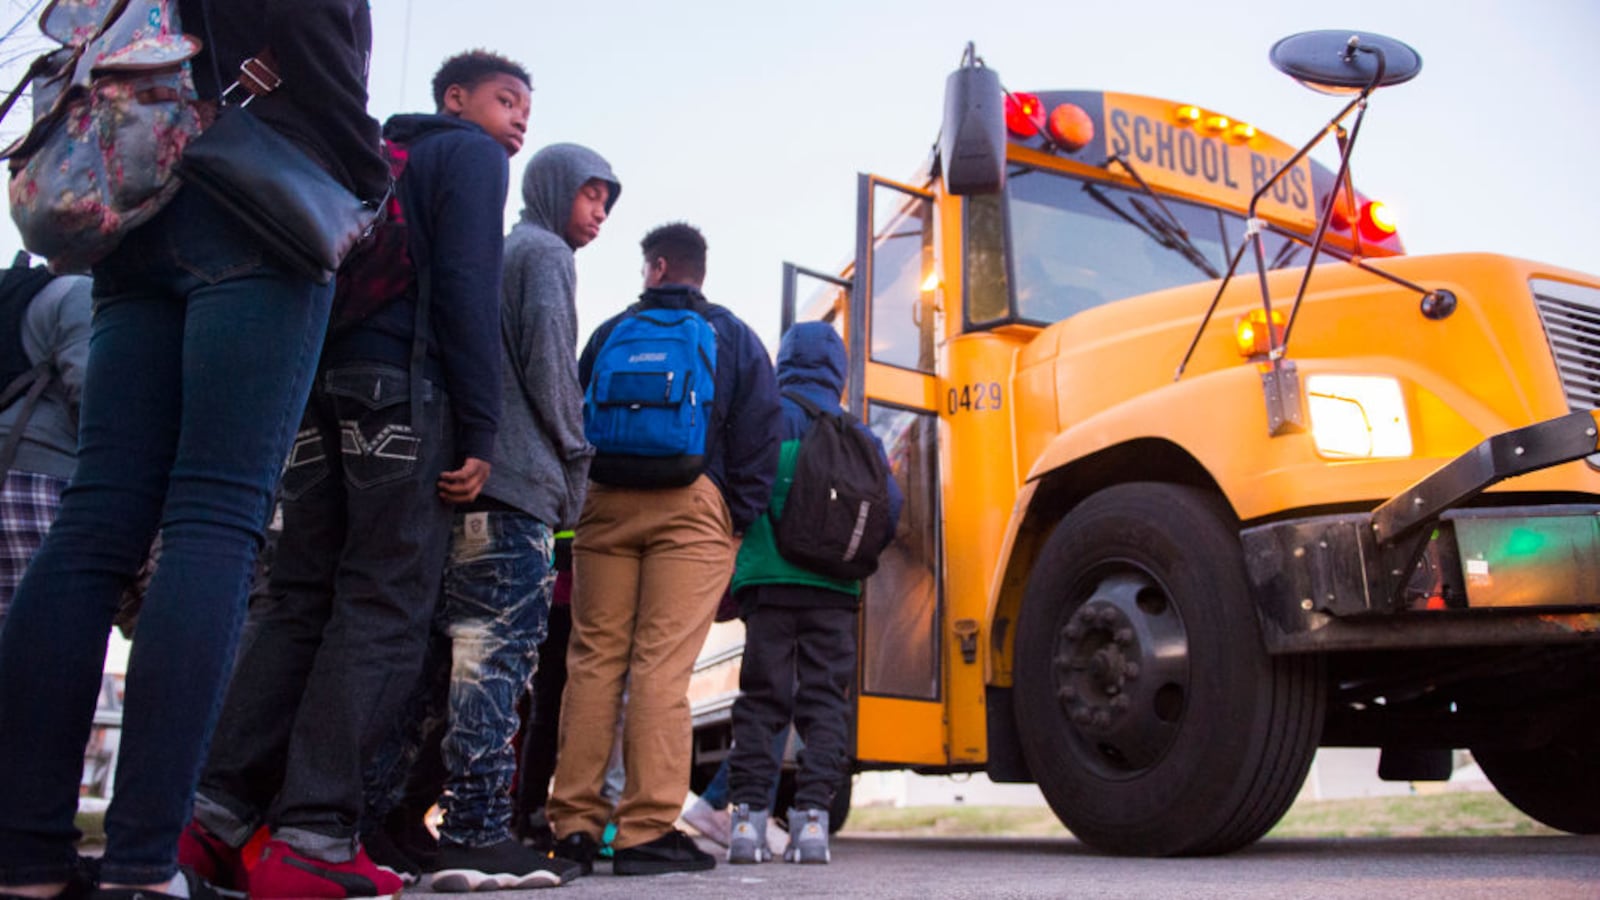 LOUISVILLE, KY: Students board a bus heading to Atherton High School in 2017 in Louisville, Kentucky. The Kentucky GOP-led state House had just passed a bill that requiring Jefferson County to return to neighborhood schooling, undoing the county's longstanding desegregation efforts.